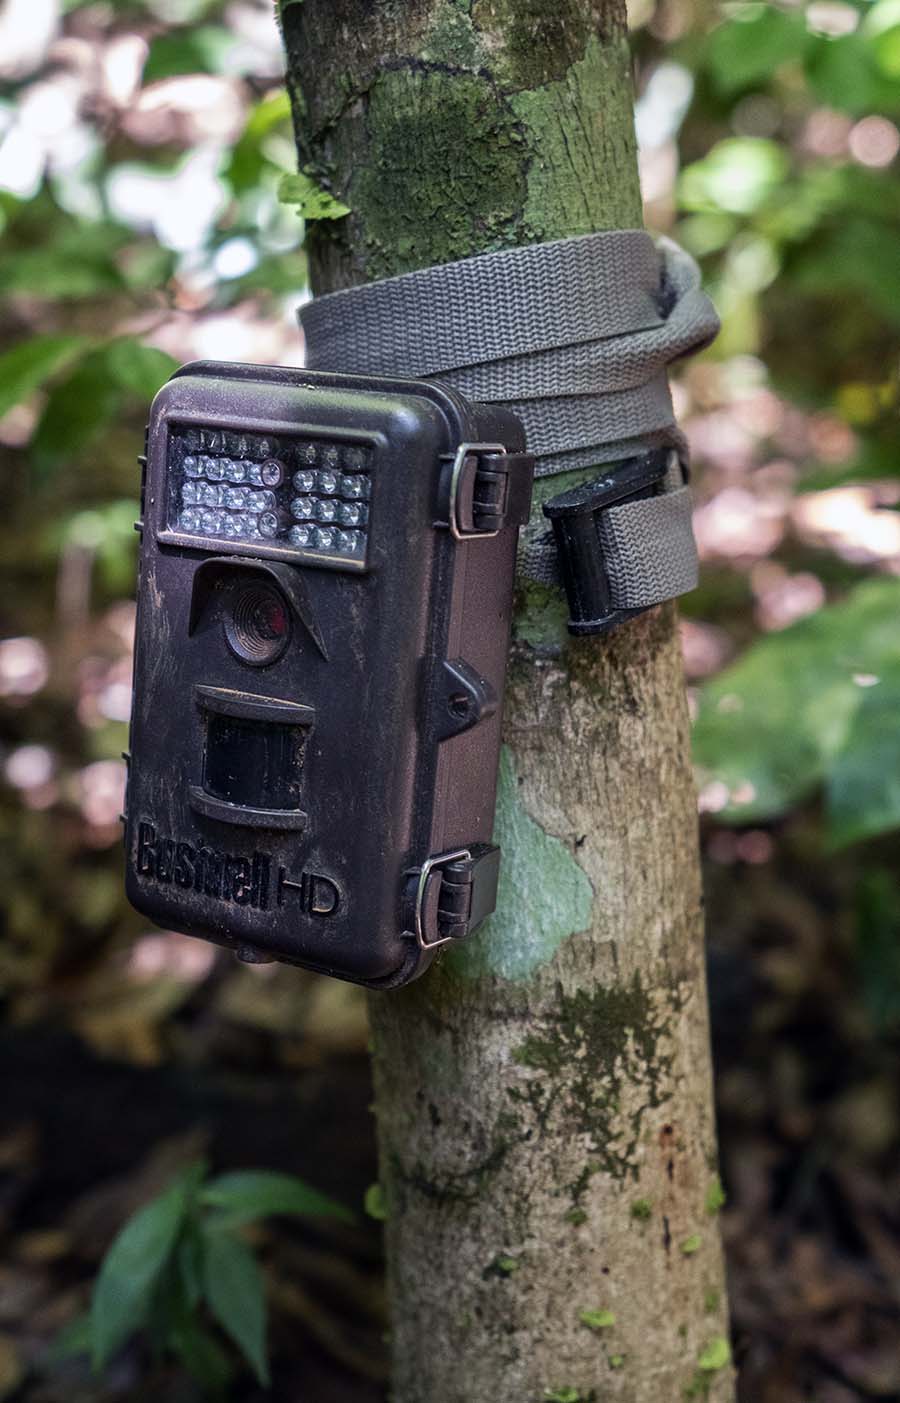 Motion-activated camera for surveying wildlife